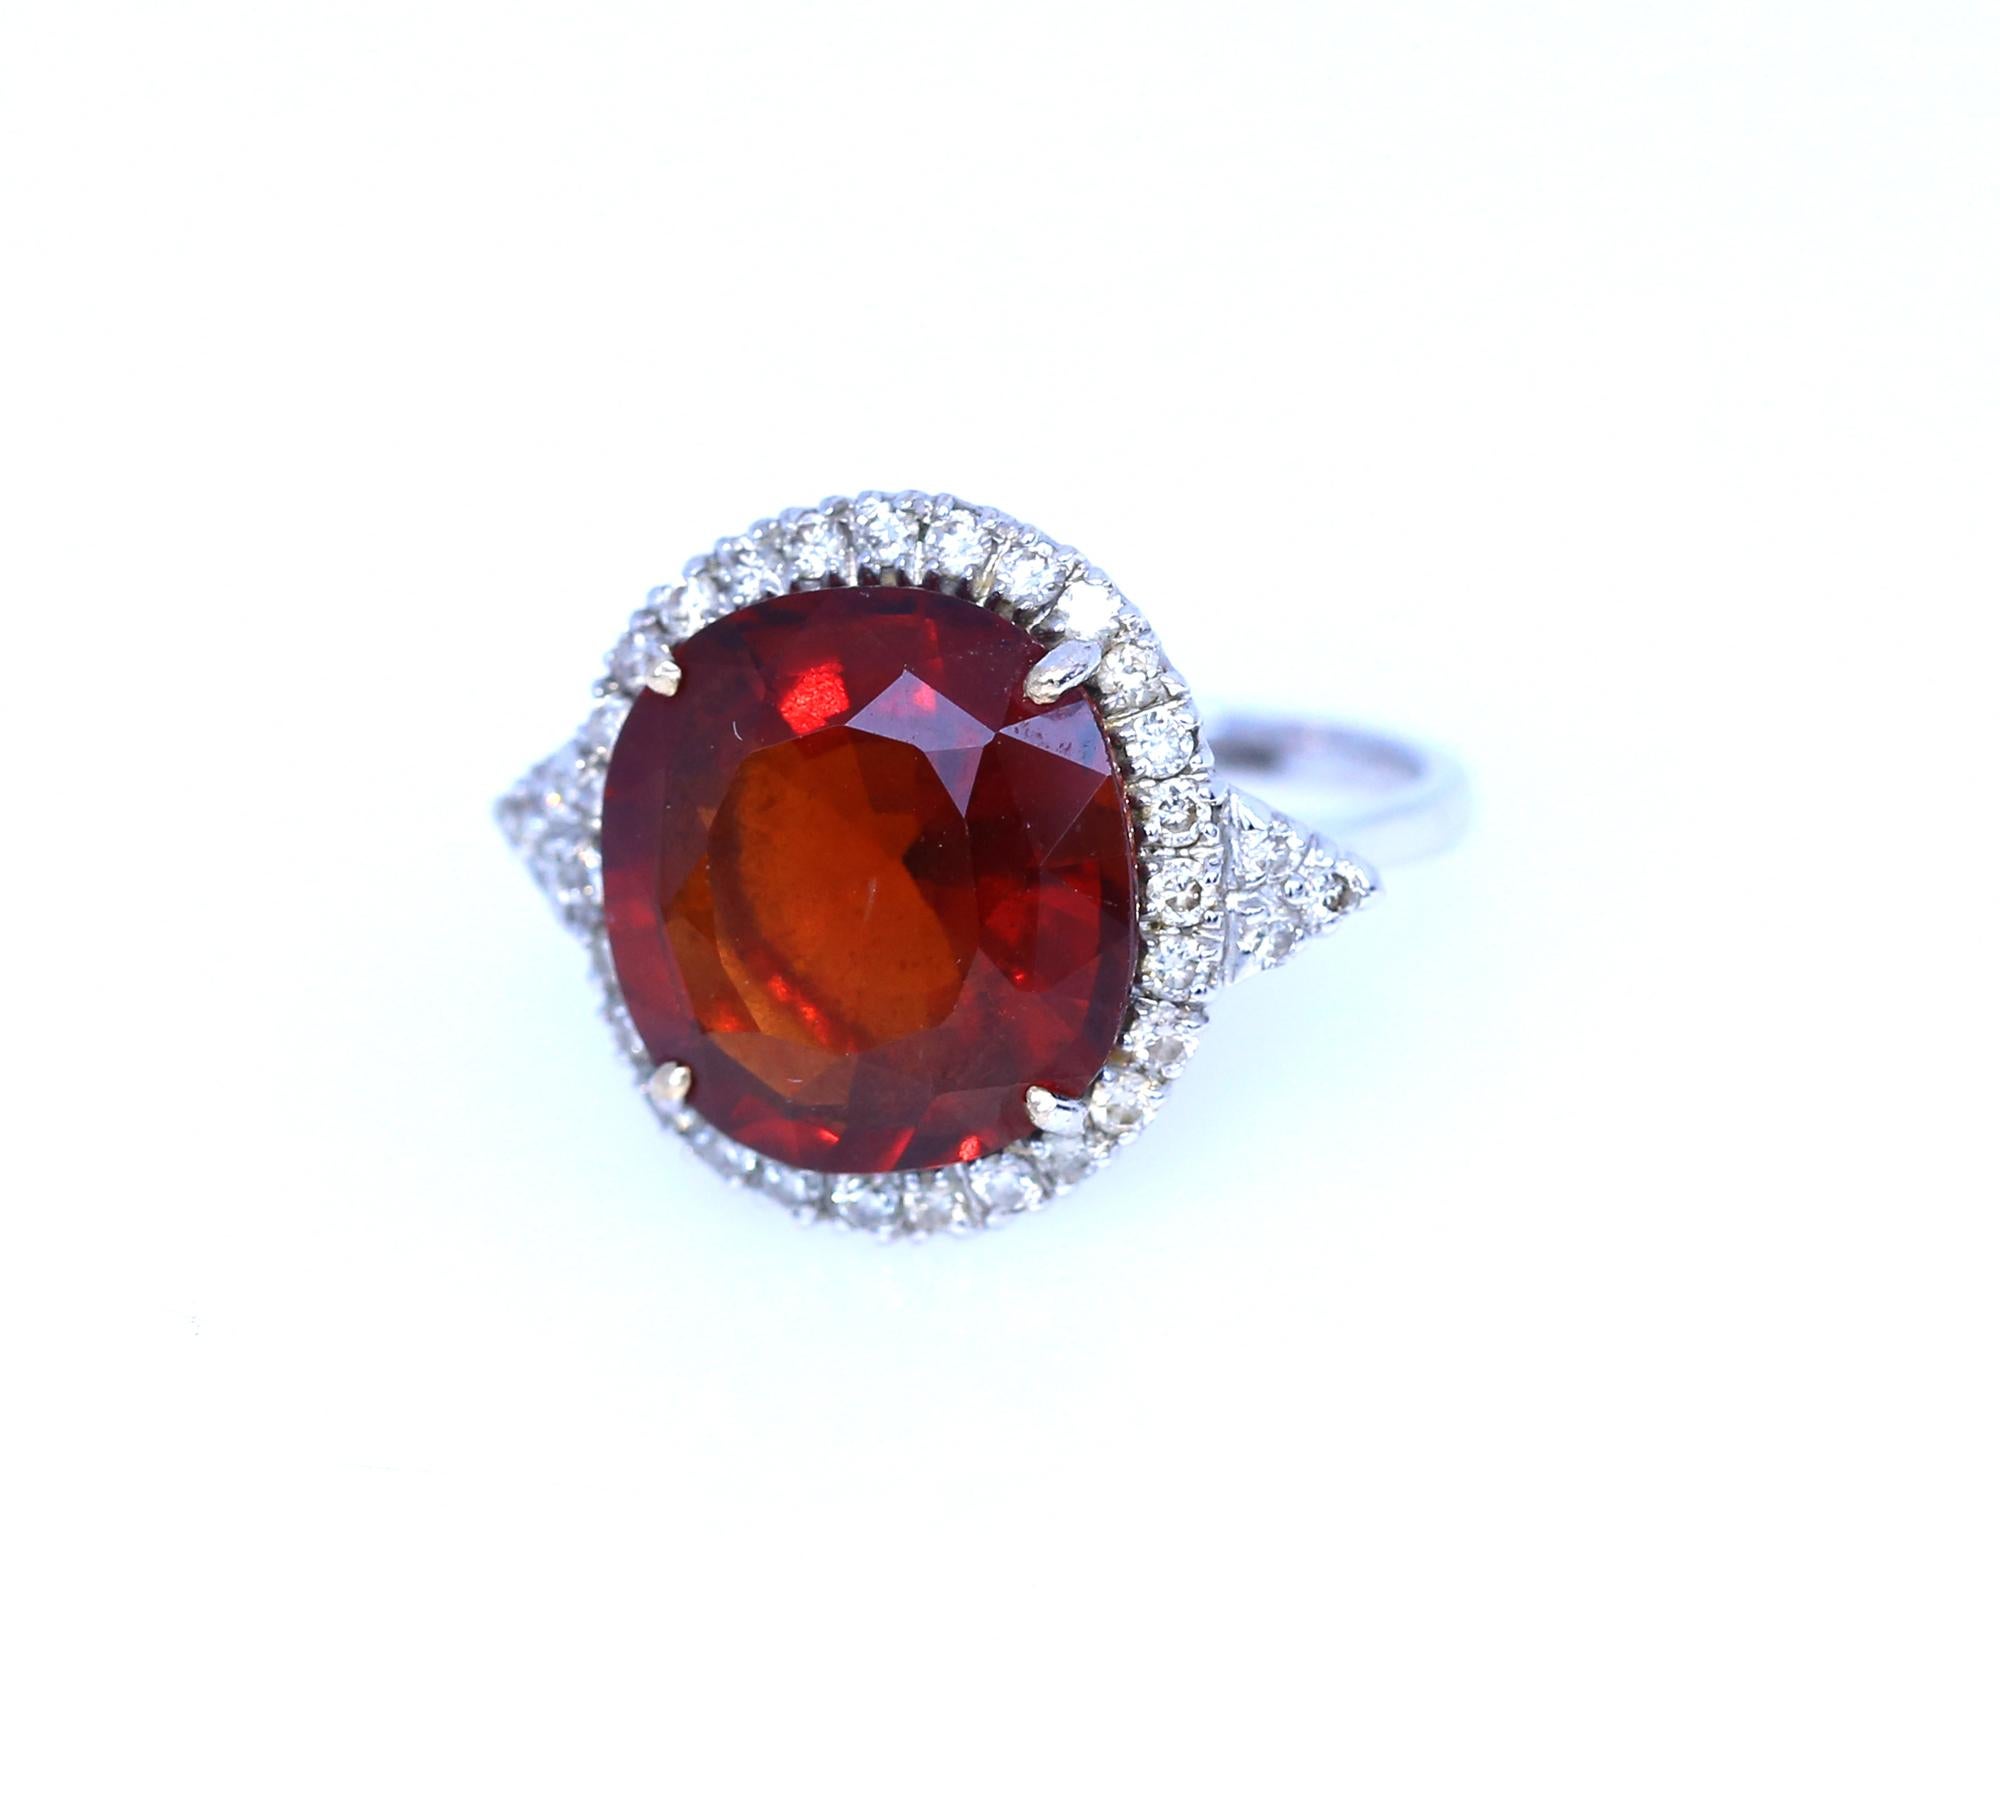 Fine Citrine of deep flame-red colour with Diamonds set around it. A cast of 18K White Gold. Delicate item executed with a great taste. Not too flashy yet important enough to draw attention. Being a part of the 60es generation, the design provides a